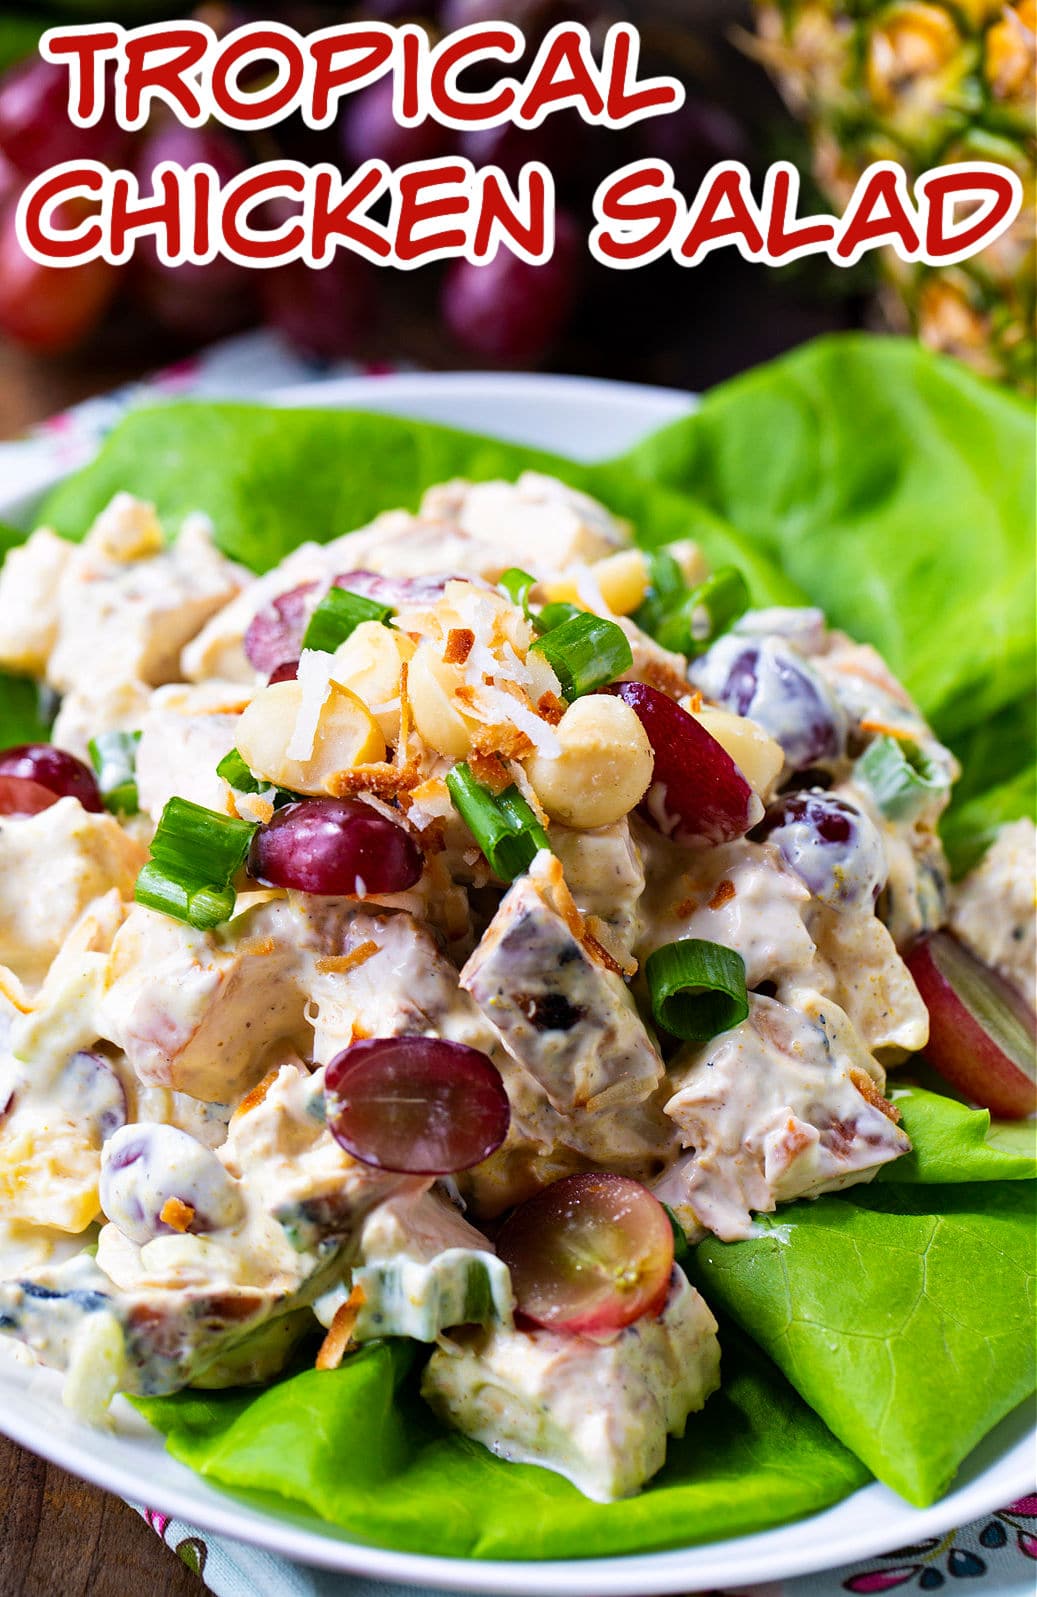 Tropical Chicken Salad on a bed of lettuce.